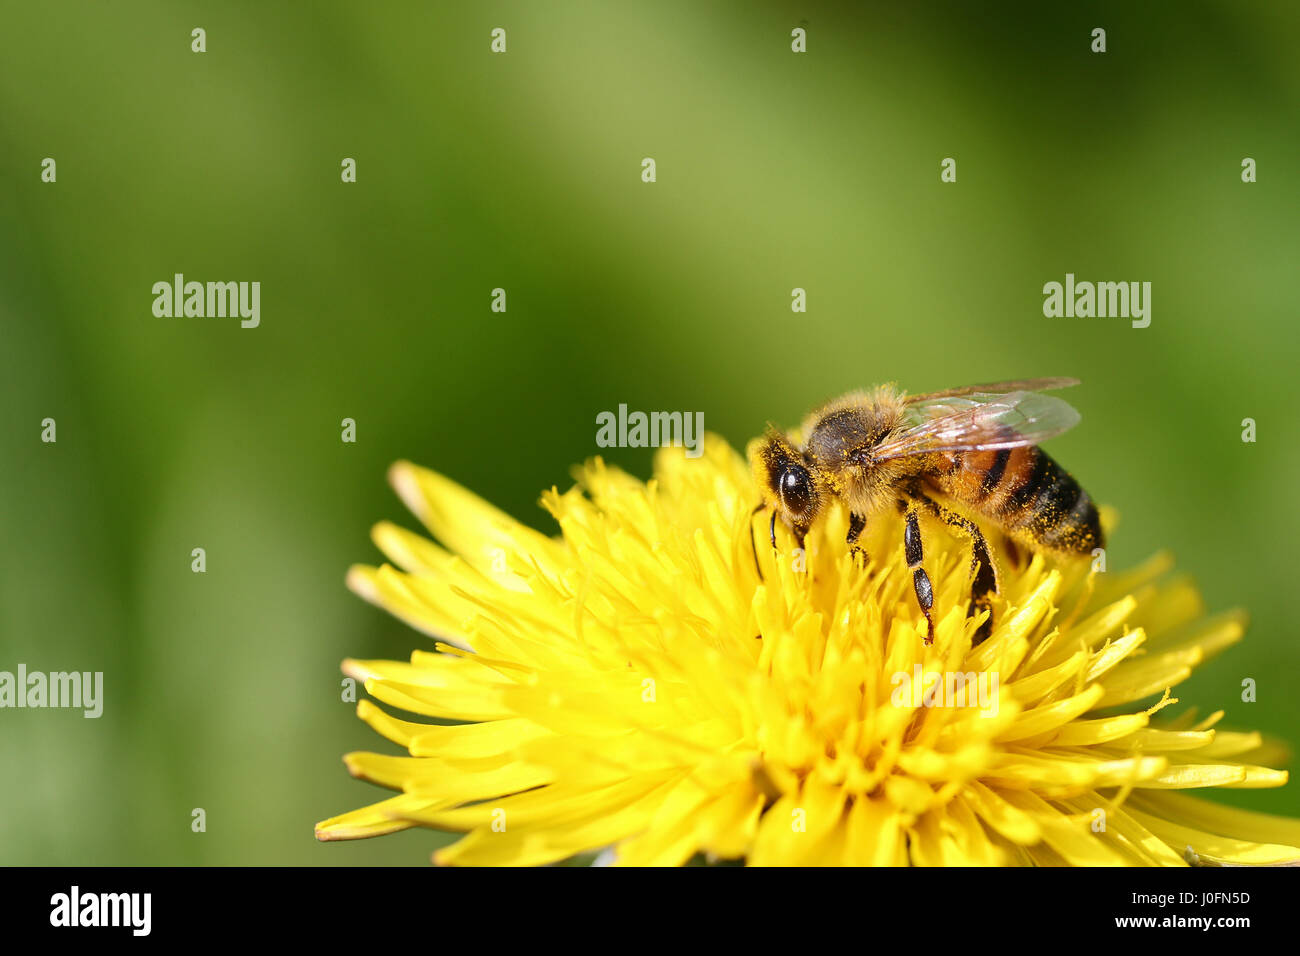 Honeybee covered in pollen going through a yellow dandelion flower against a blurred green background Stock Photo